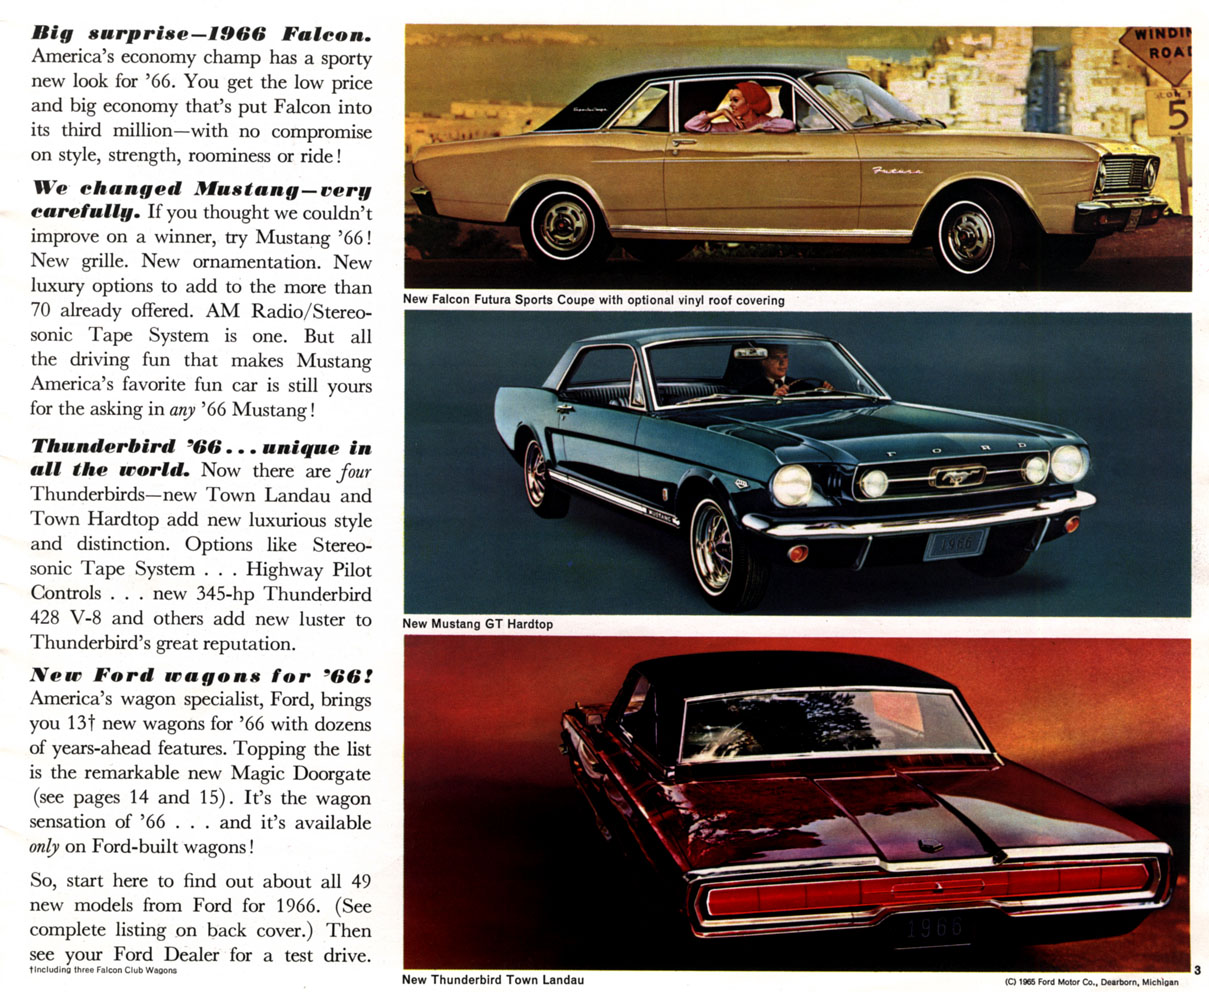 1966 Ford Full-Line Brochure Page 15